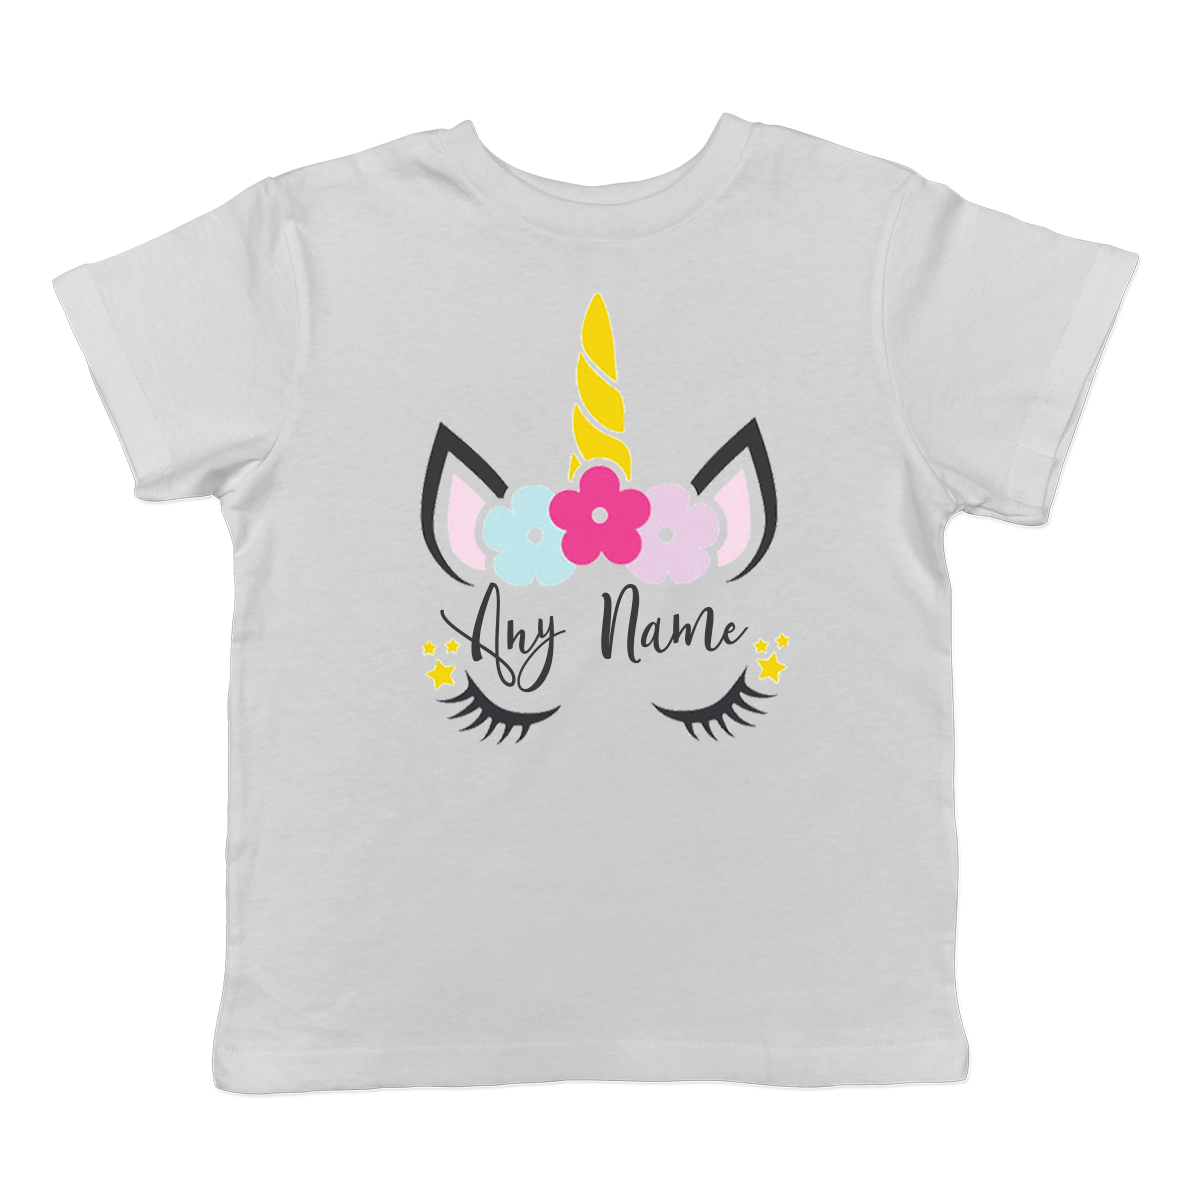 Personalised Unicorn Design T-Shirt Top baby, toddler and kids sizes!